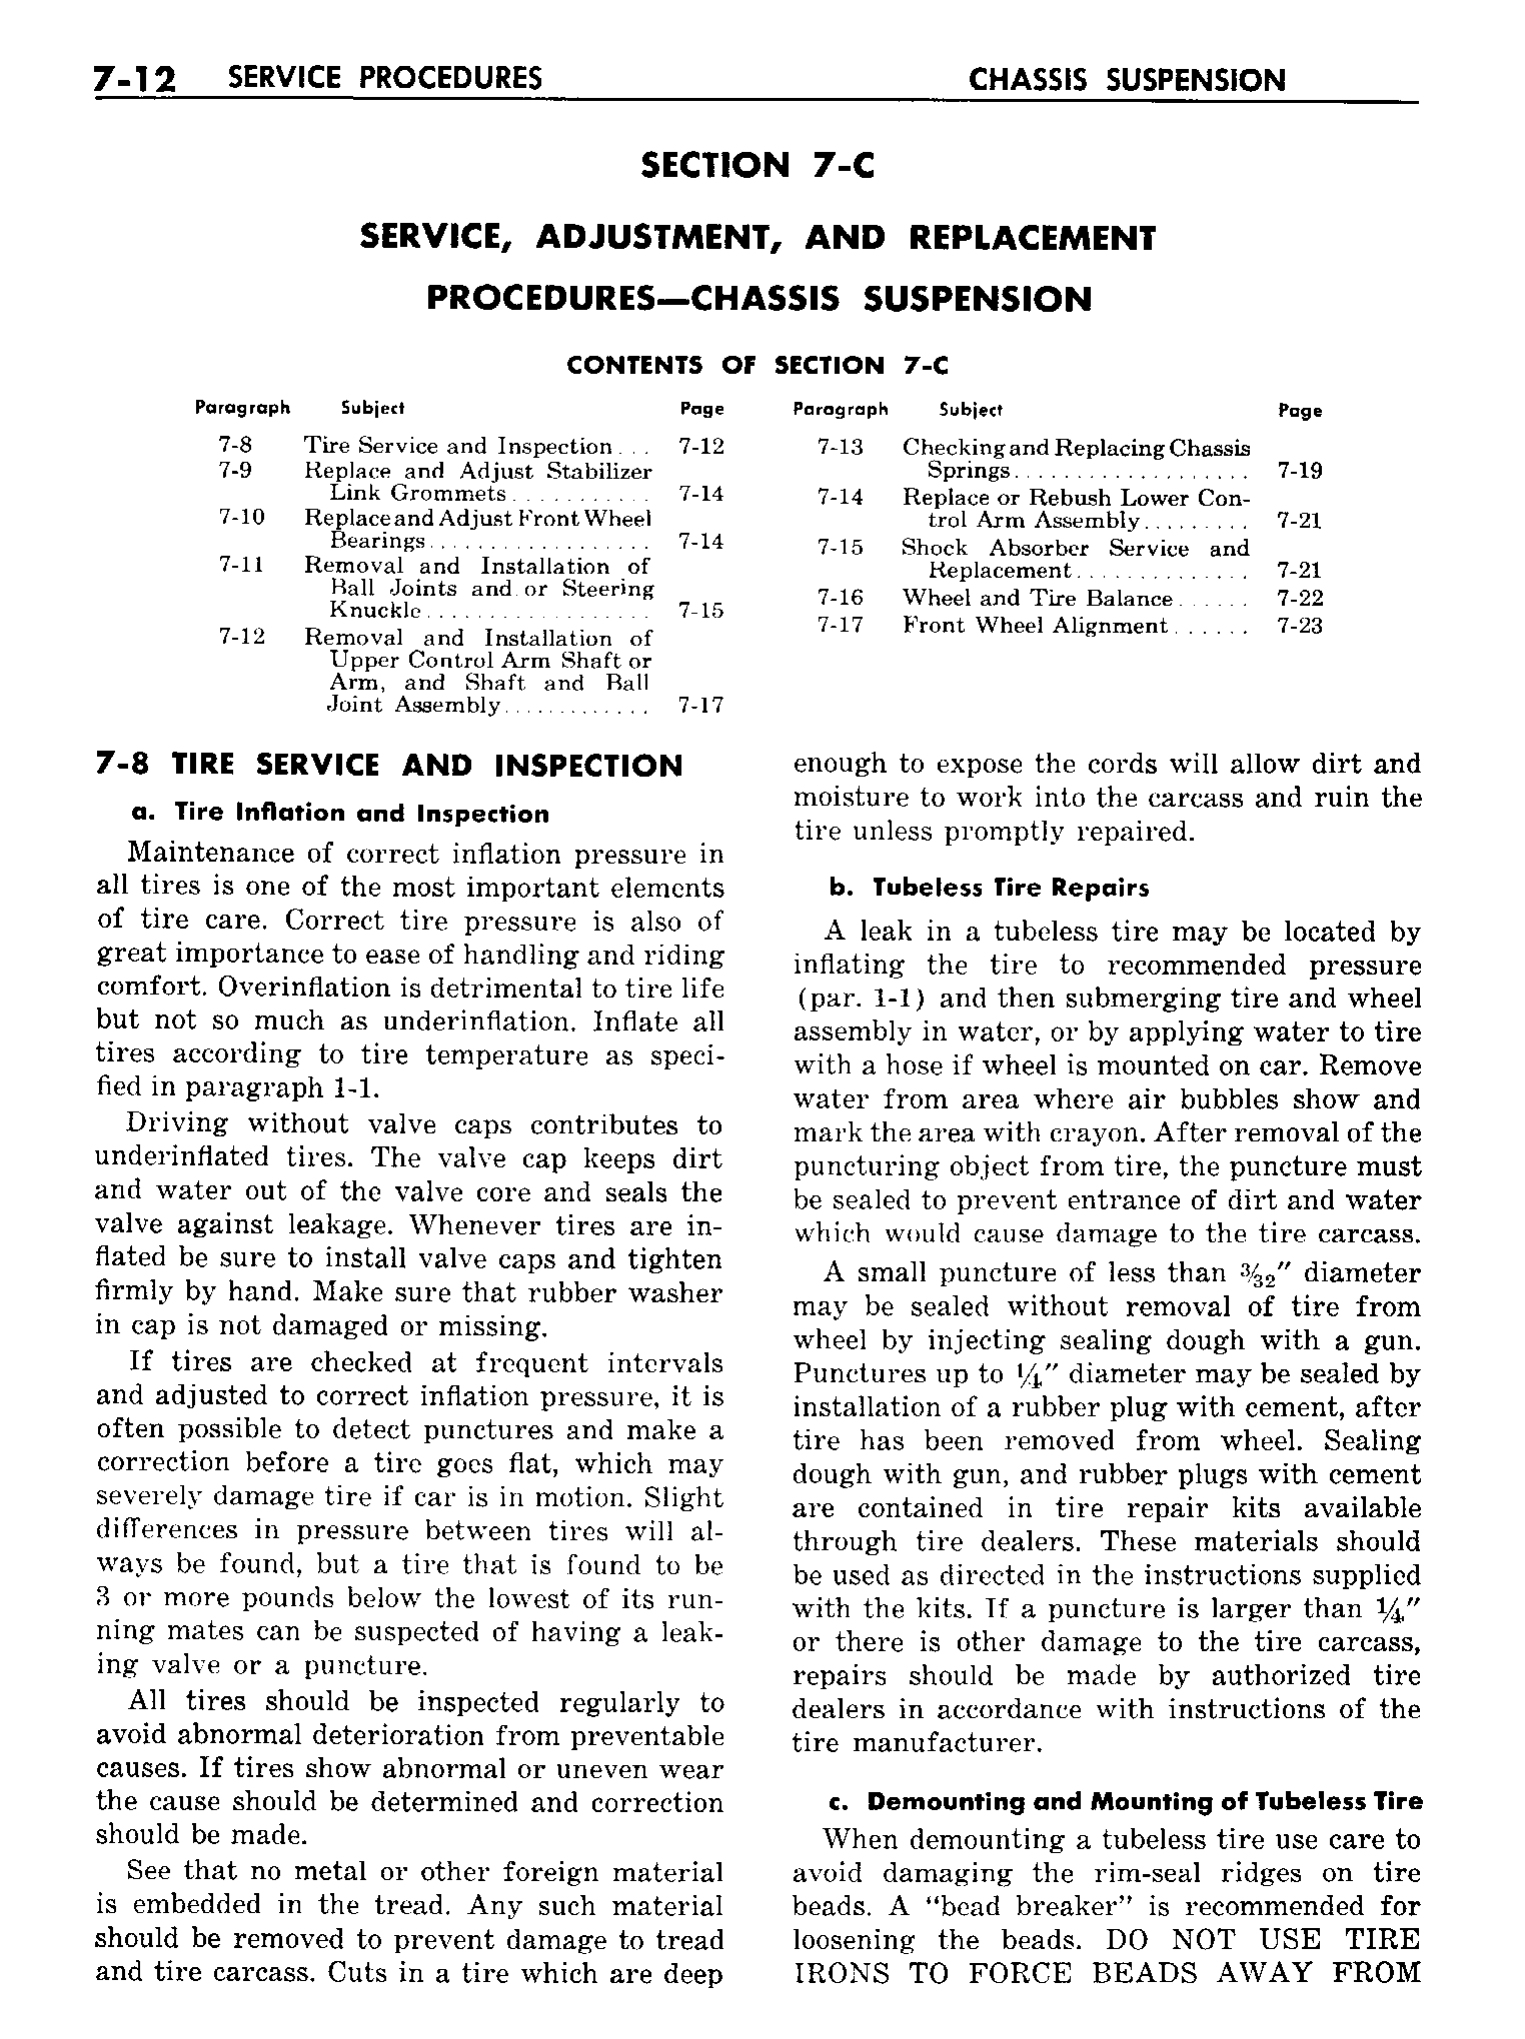 n_08 1958 Buick Shop Manual - Chassis Suspension_12.jpg